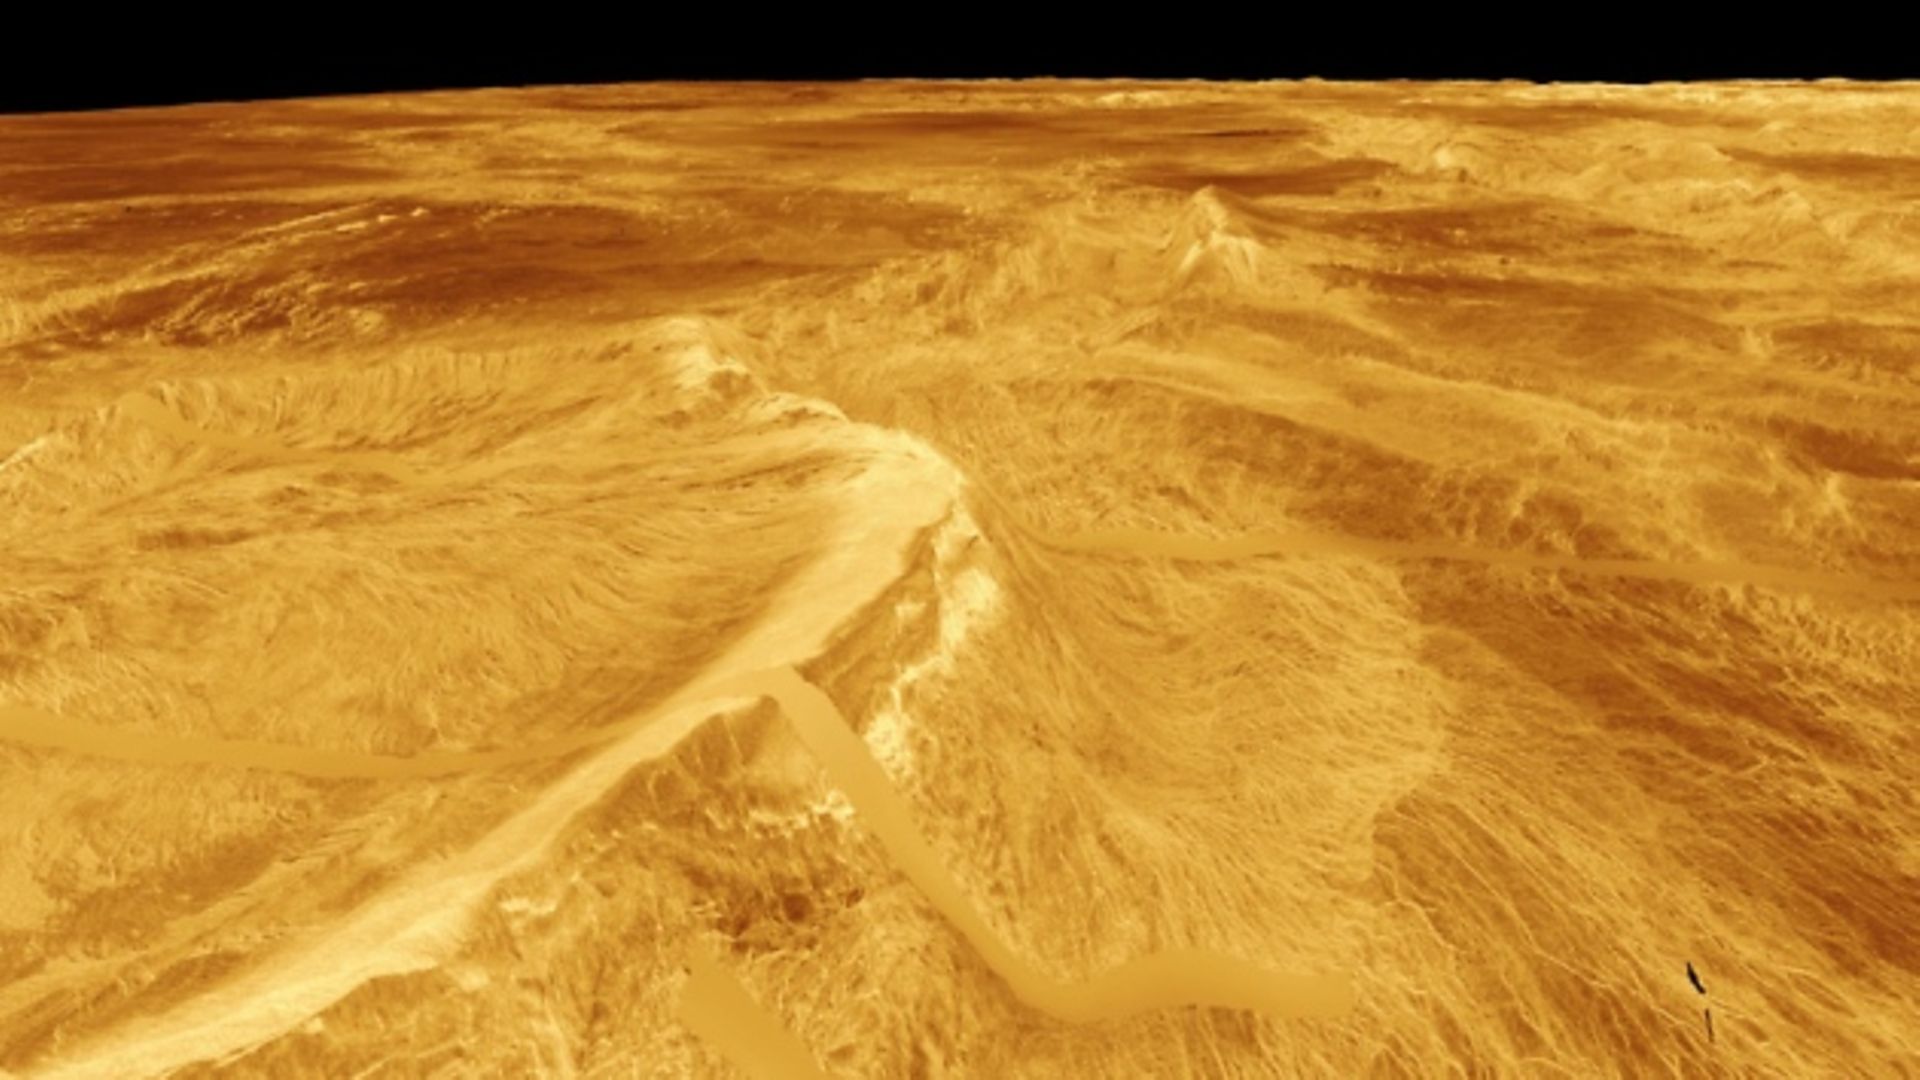 This computer-generated perspective view of Latona Corona and Dali Chasma on Venus shows Magellan radar data superimposed on topography. (Photo by: Photo12/Universal Images Group via Getty Images) - Credit: Photo12/Universal Images Group via Getty Images